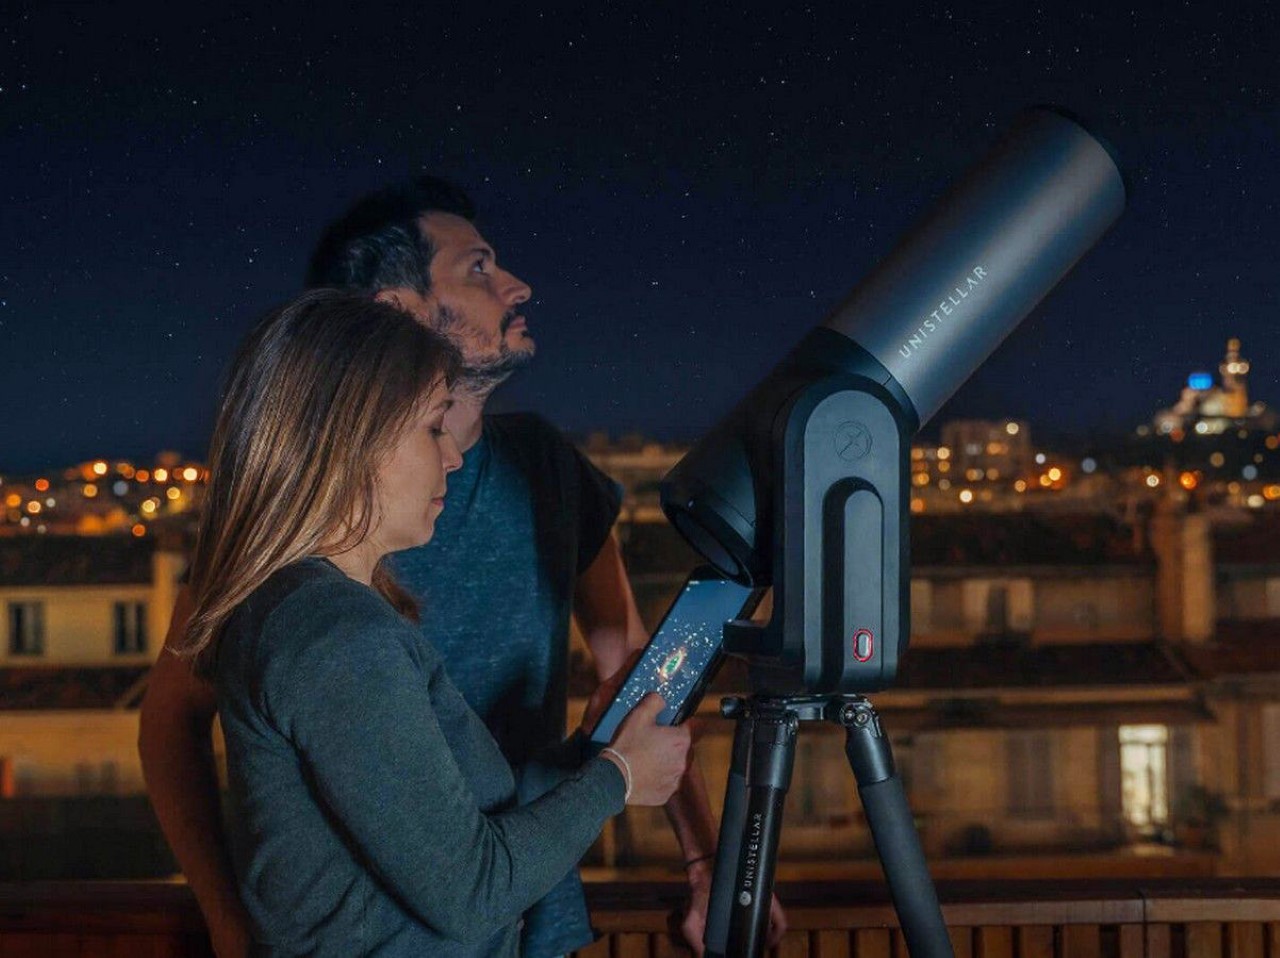 Stargazing from your couch: This ‘smart telescope’ will directly share astrophotographic images to your phone